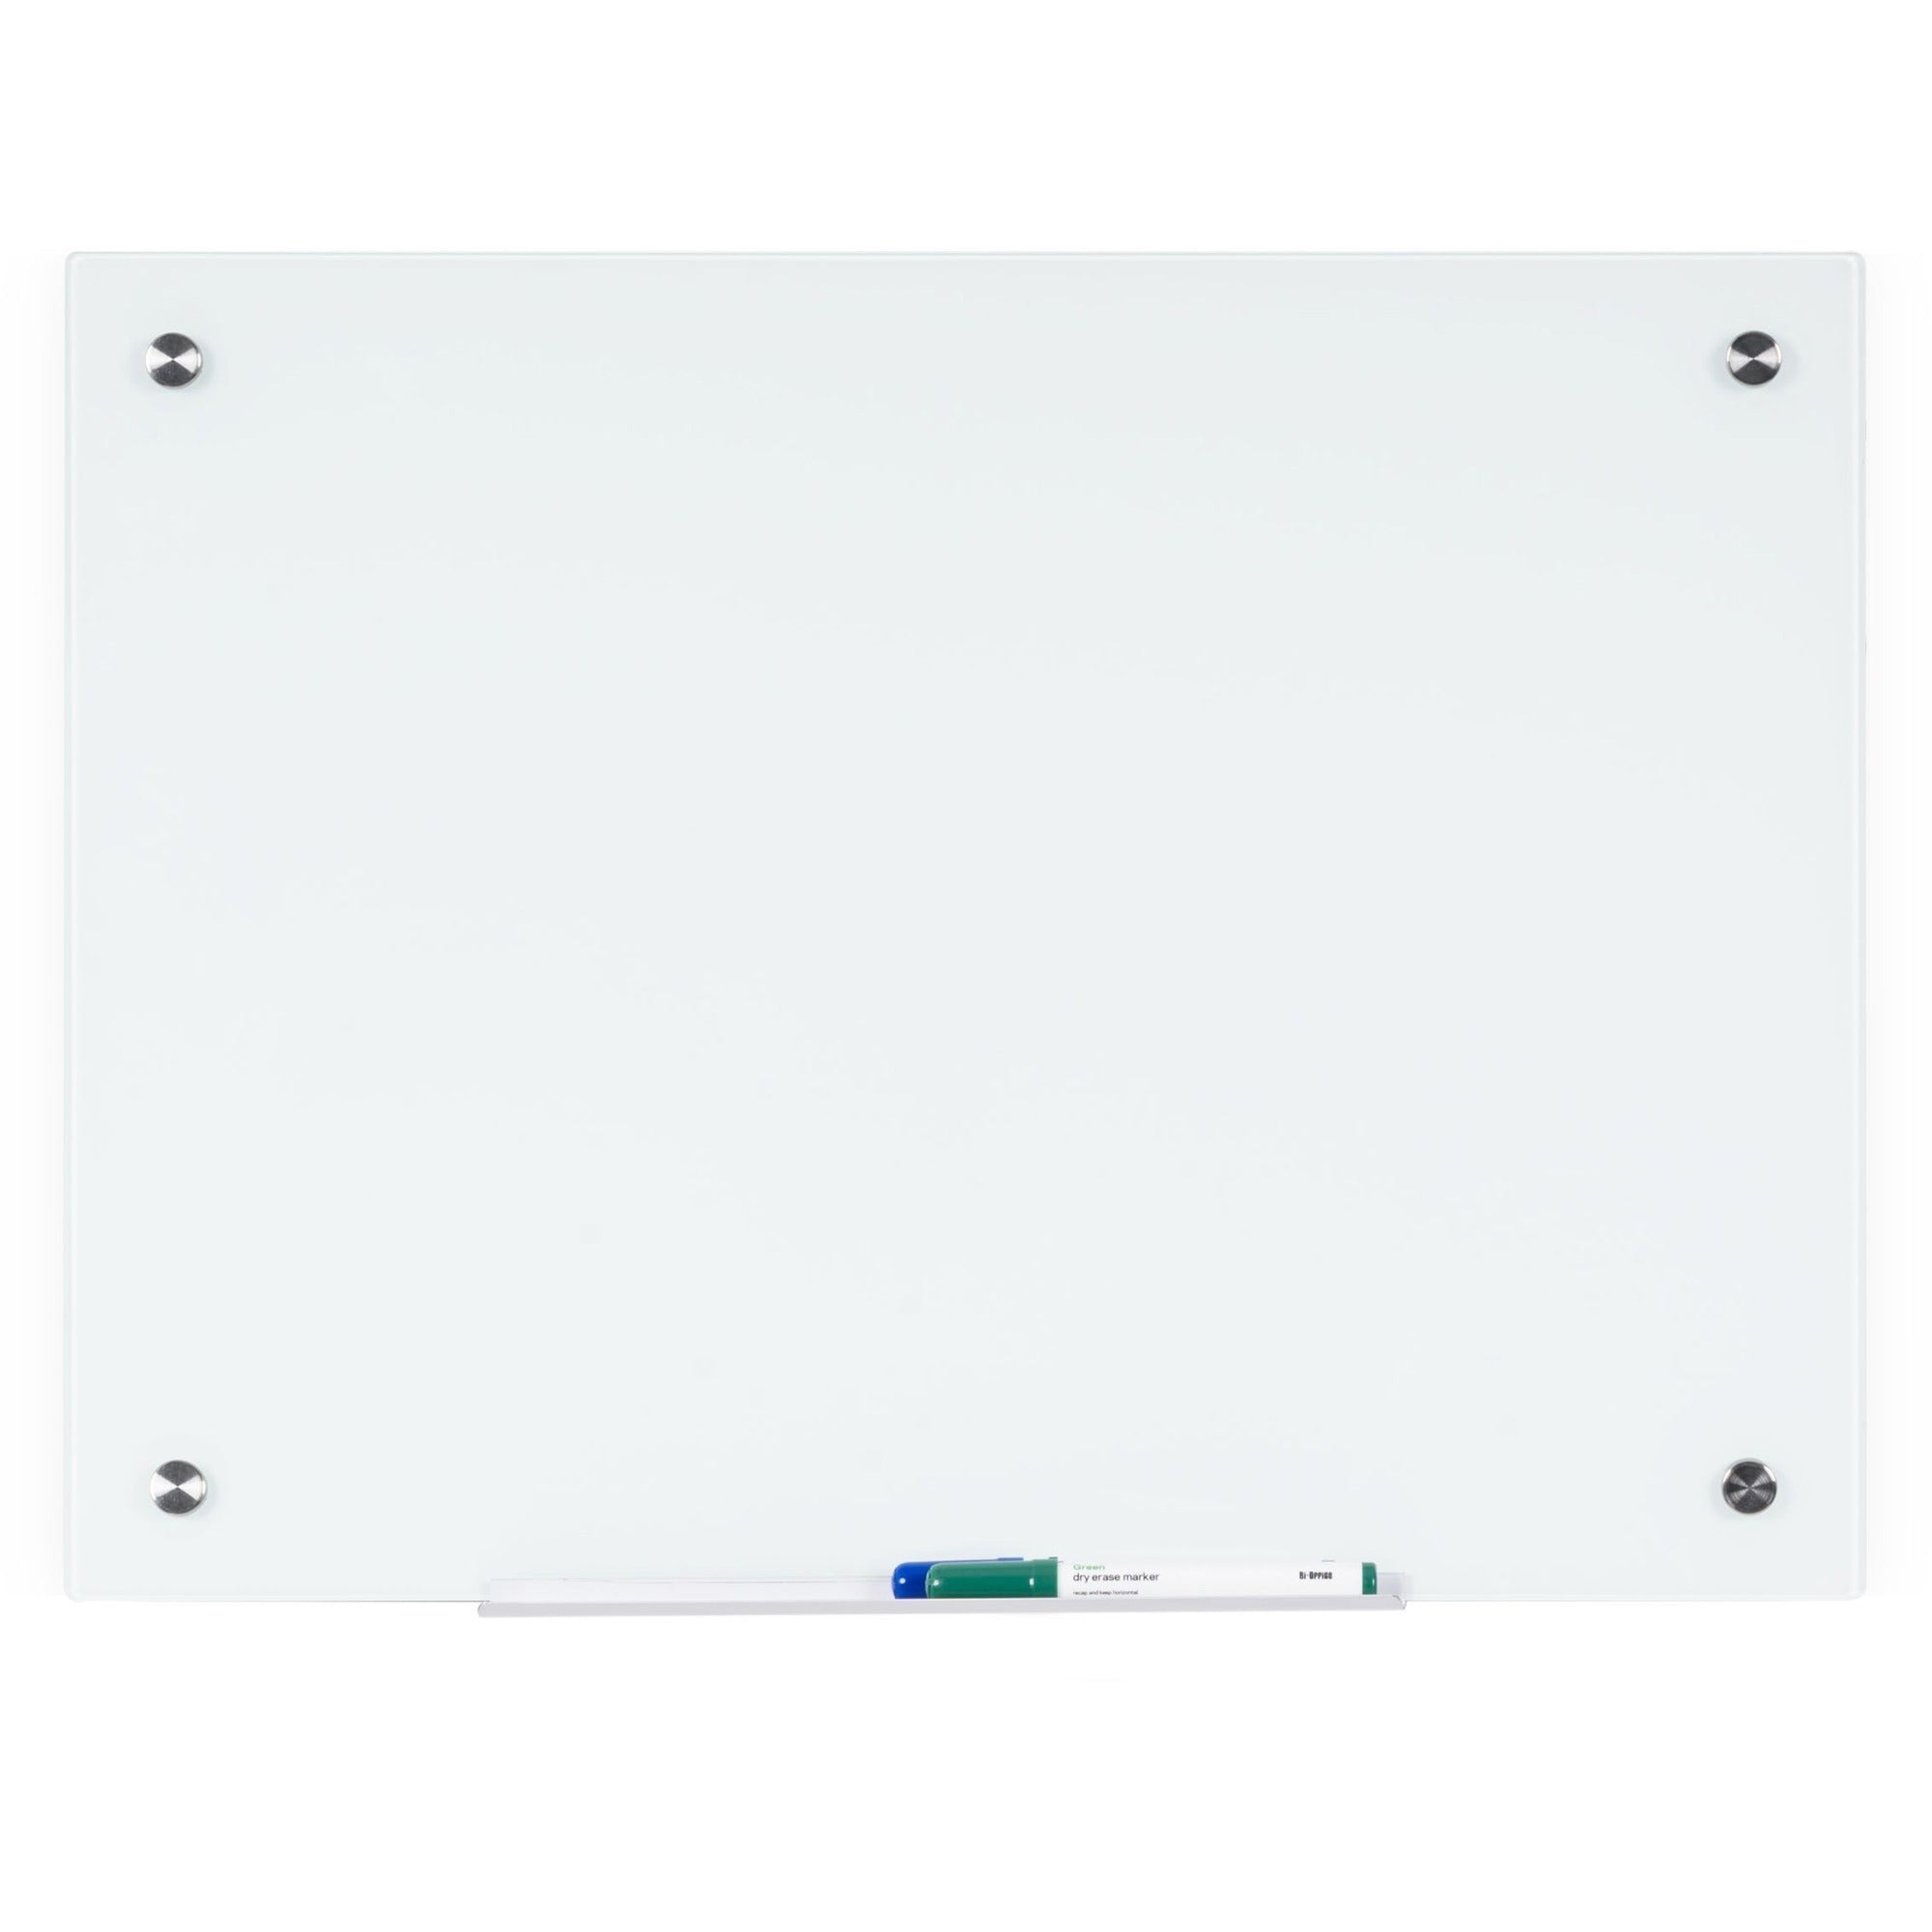 bi-silque-dry-erase-glass-board-24-2-ft-width-x-36-3-ft-height-white-tempered-glass-surface-rectangle-horizontal-vertical-1-each_bvcgl074407 - 1